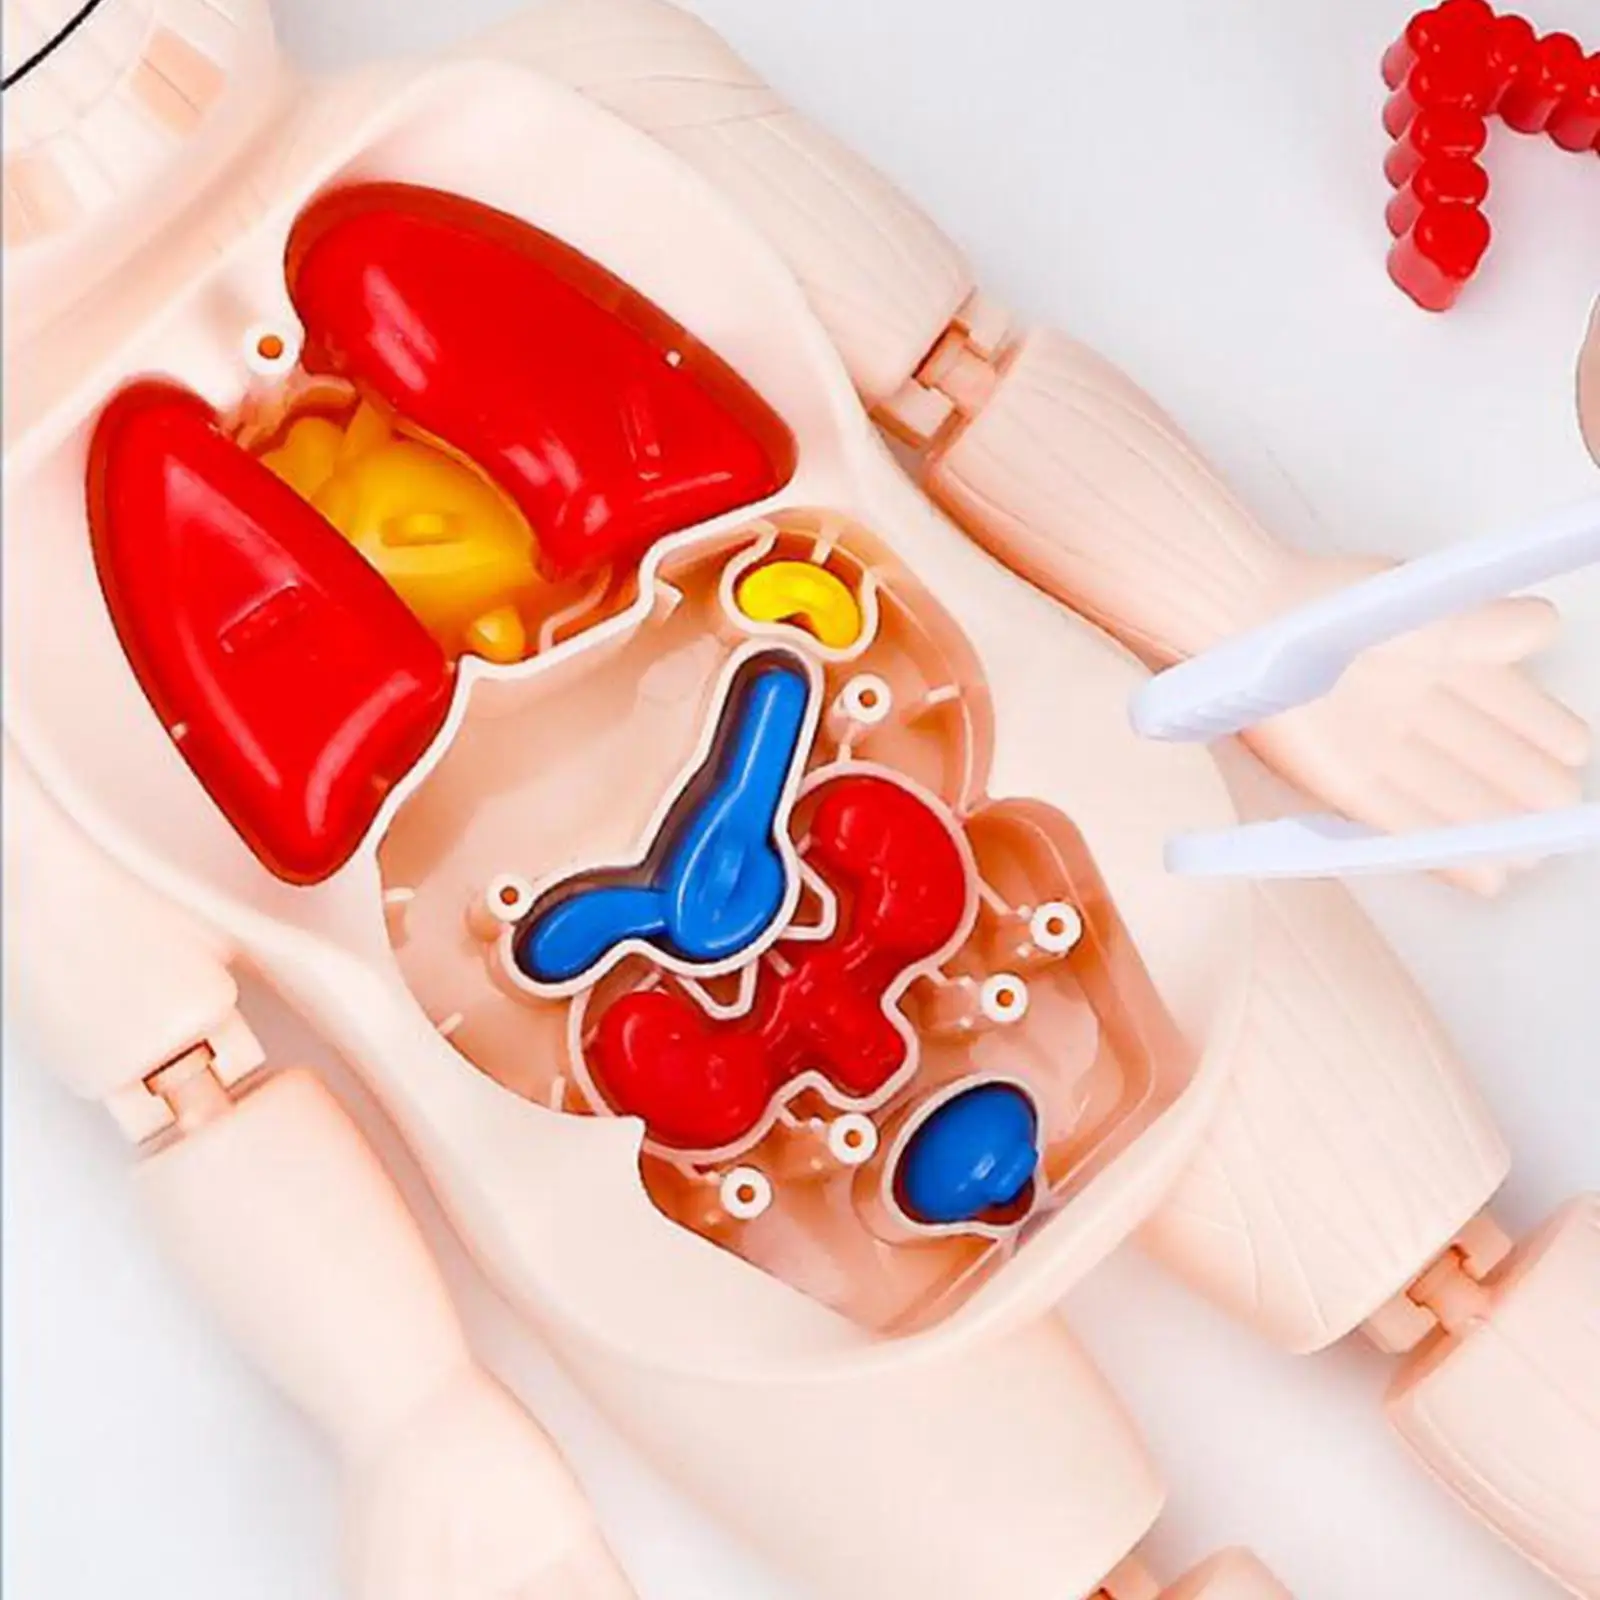 Body Puzzle Development Toy Collectible DIY Accessories for Learning